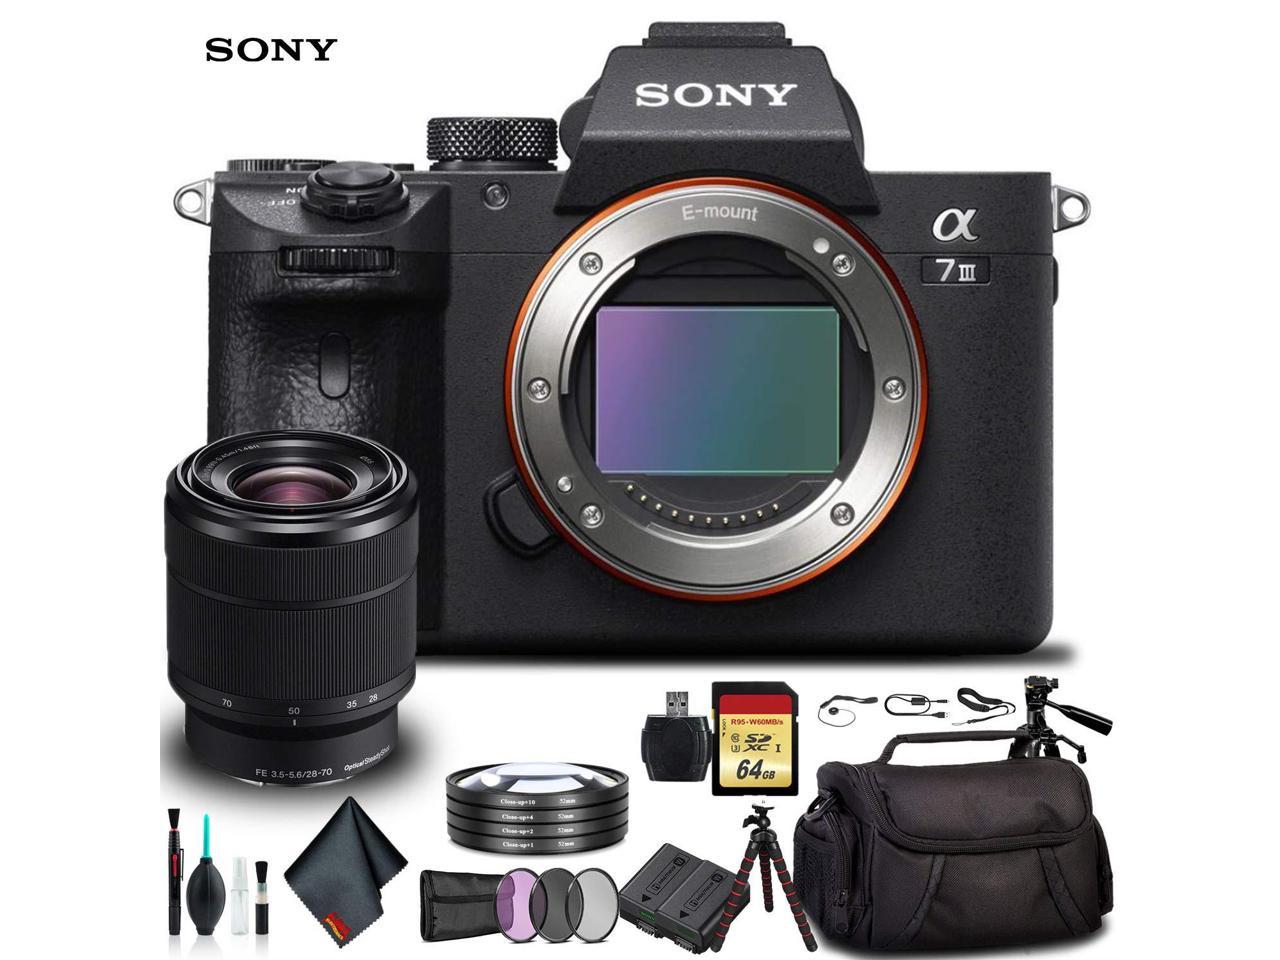 Sony Alpha a7 III Mirrorless Camera with 28-70mm Lens ILCE7M3K/B With Soft Bag, Tripod, Additional Battery, 64GB Memory Card, Card Reader , Plus Essential Accessories